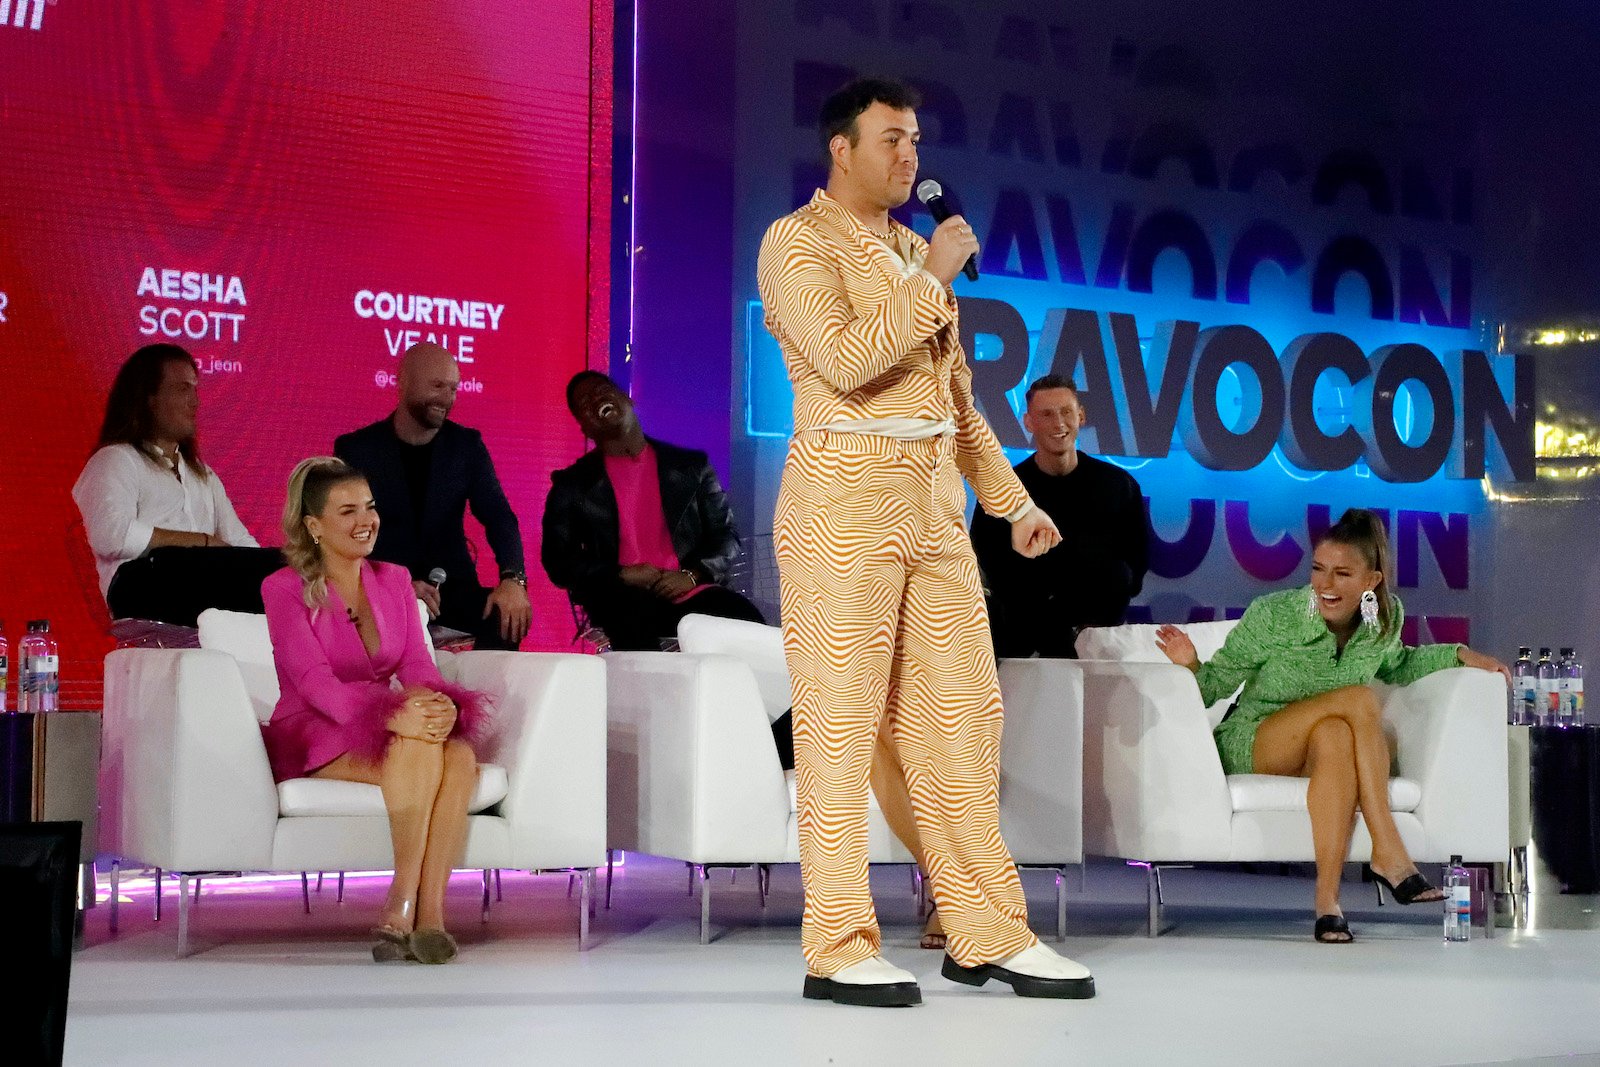 Gary King, Daisy Kelliher, Dave White, Mzi 'Zee' Dempers, Kyle Viljoen, Courtney Veale, Fraser Olender, and Aesha Scott from the 'Below Deck' franchise on stage at BravoCon